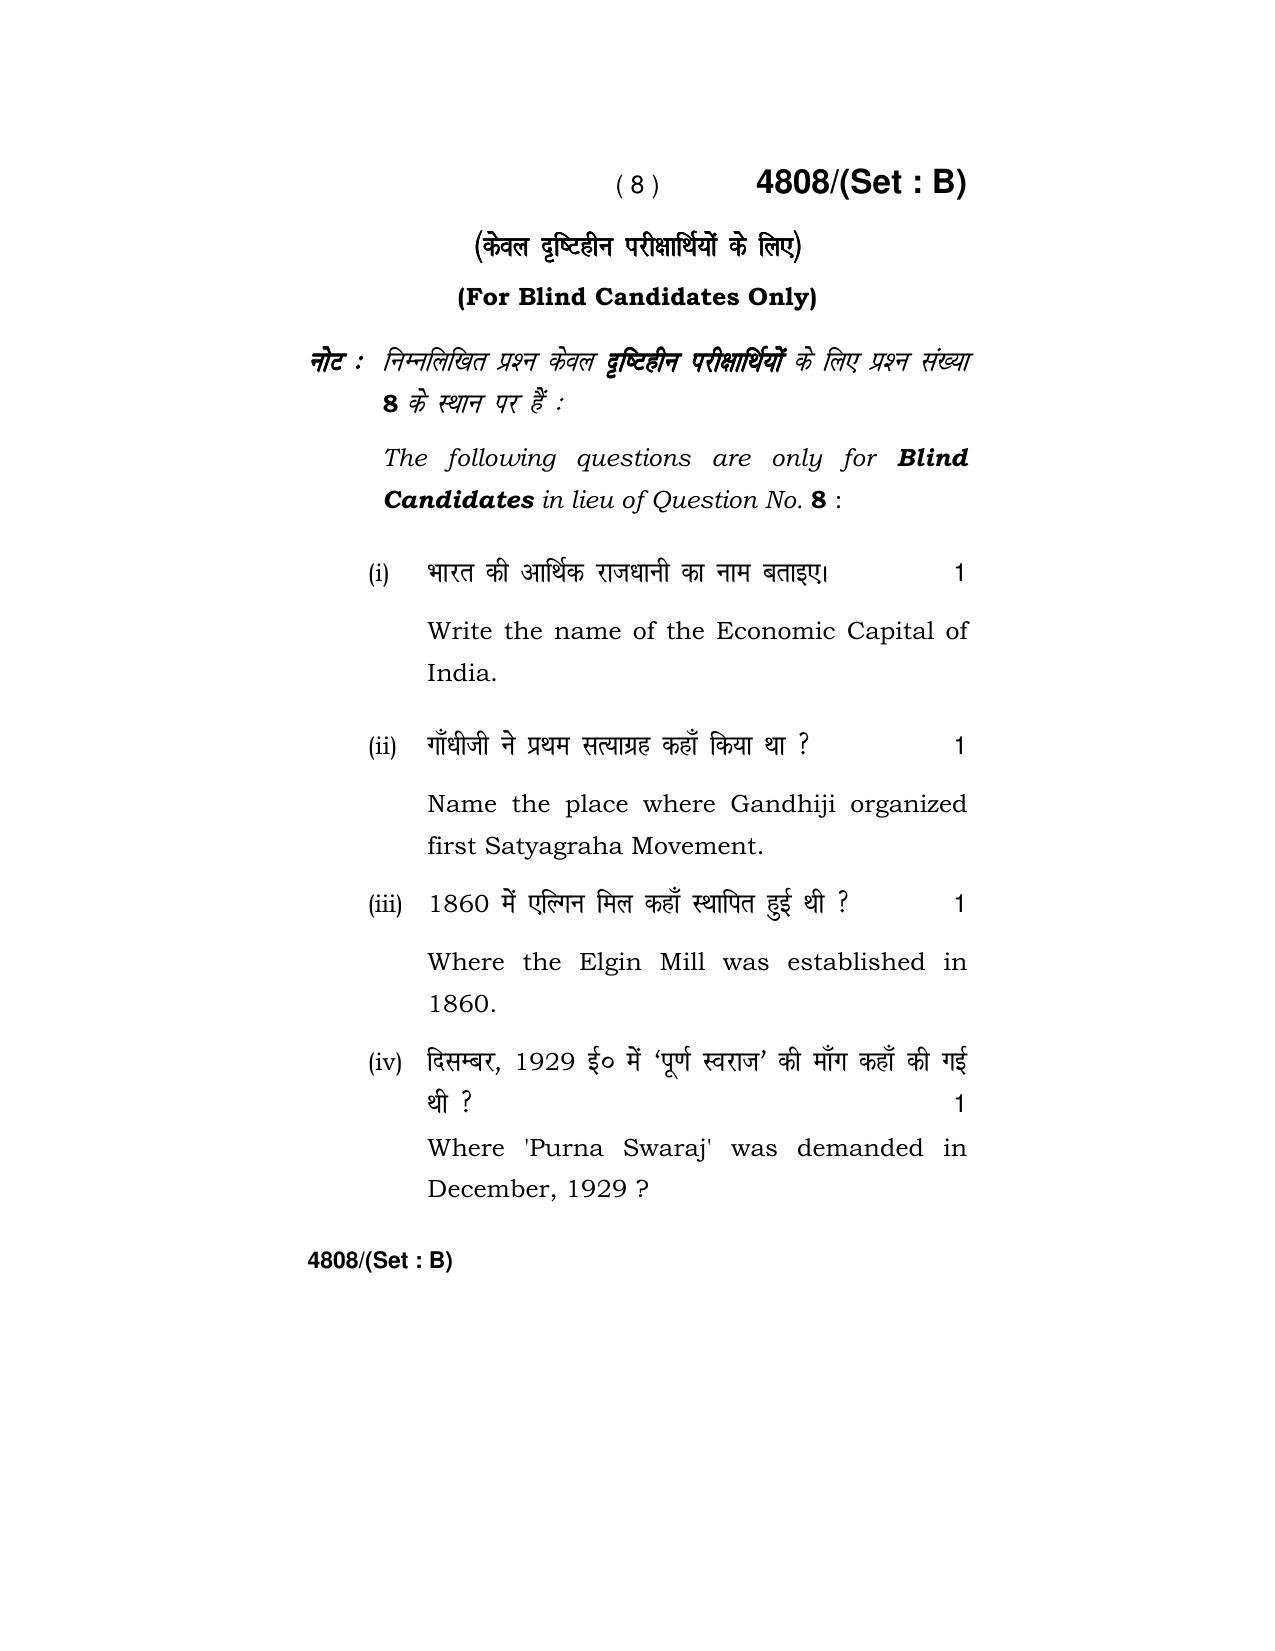 Haryana Board HBSE Class 10 Social Science (Re-appear) 2020 Question Paper - Page 24